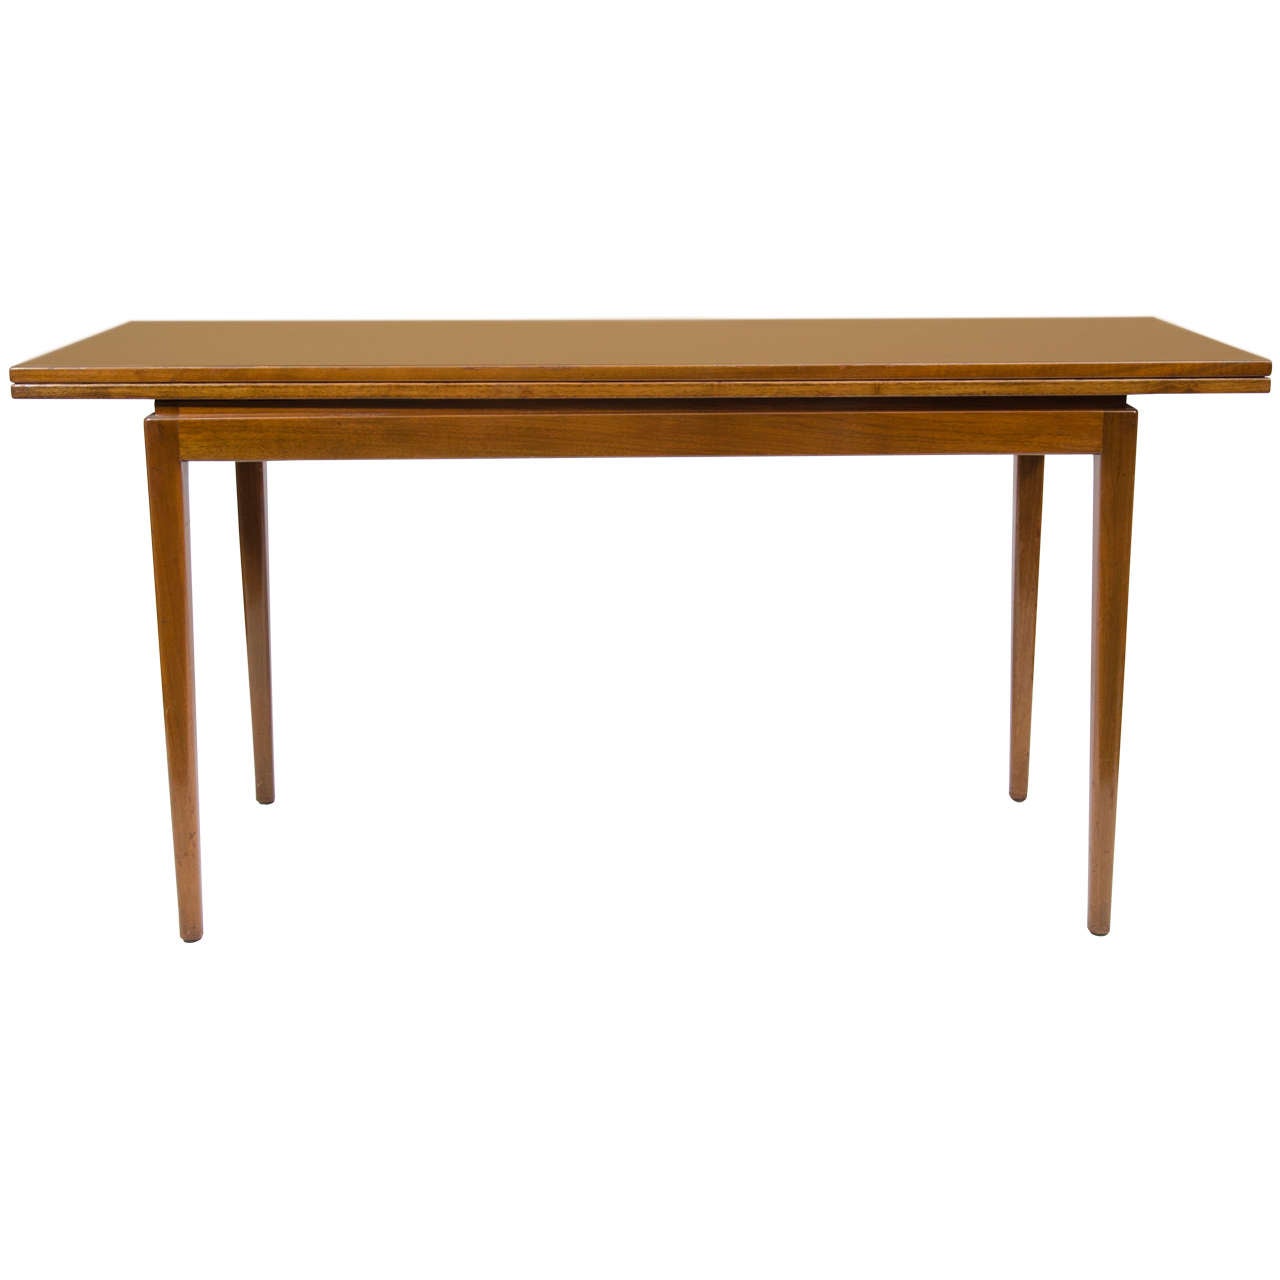 Jens Risom Convertible Dining Console Table